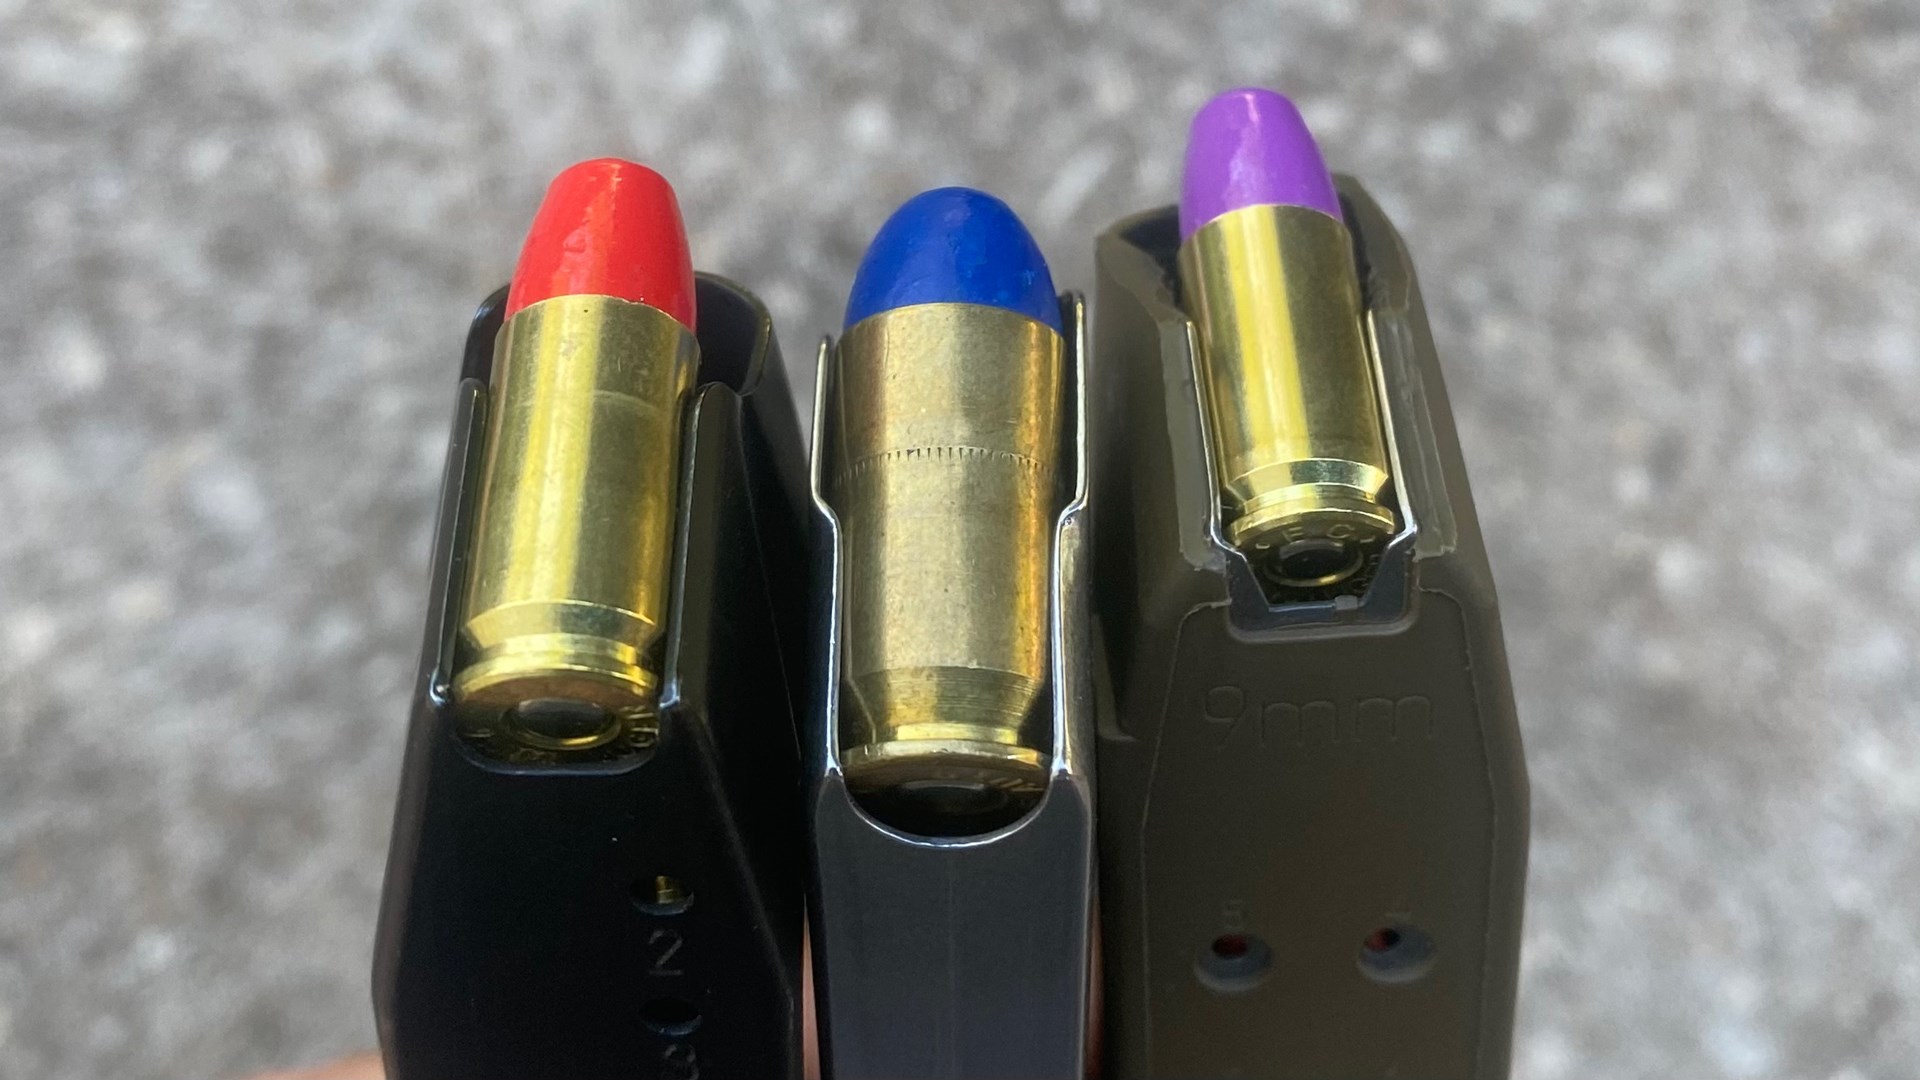 coated bullets red blue ammunition magazine three left to right stack